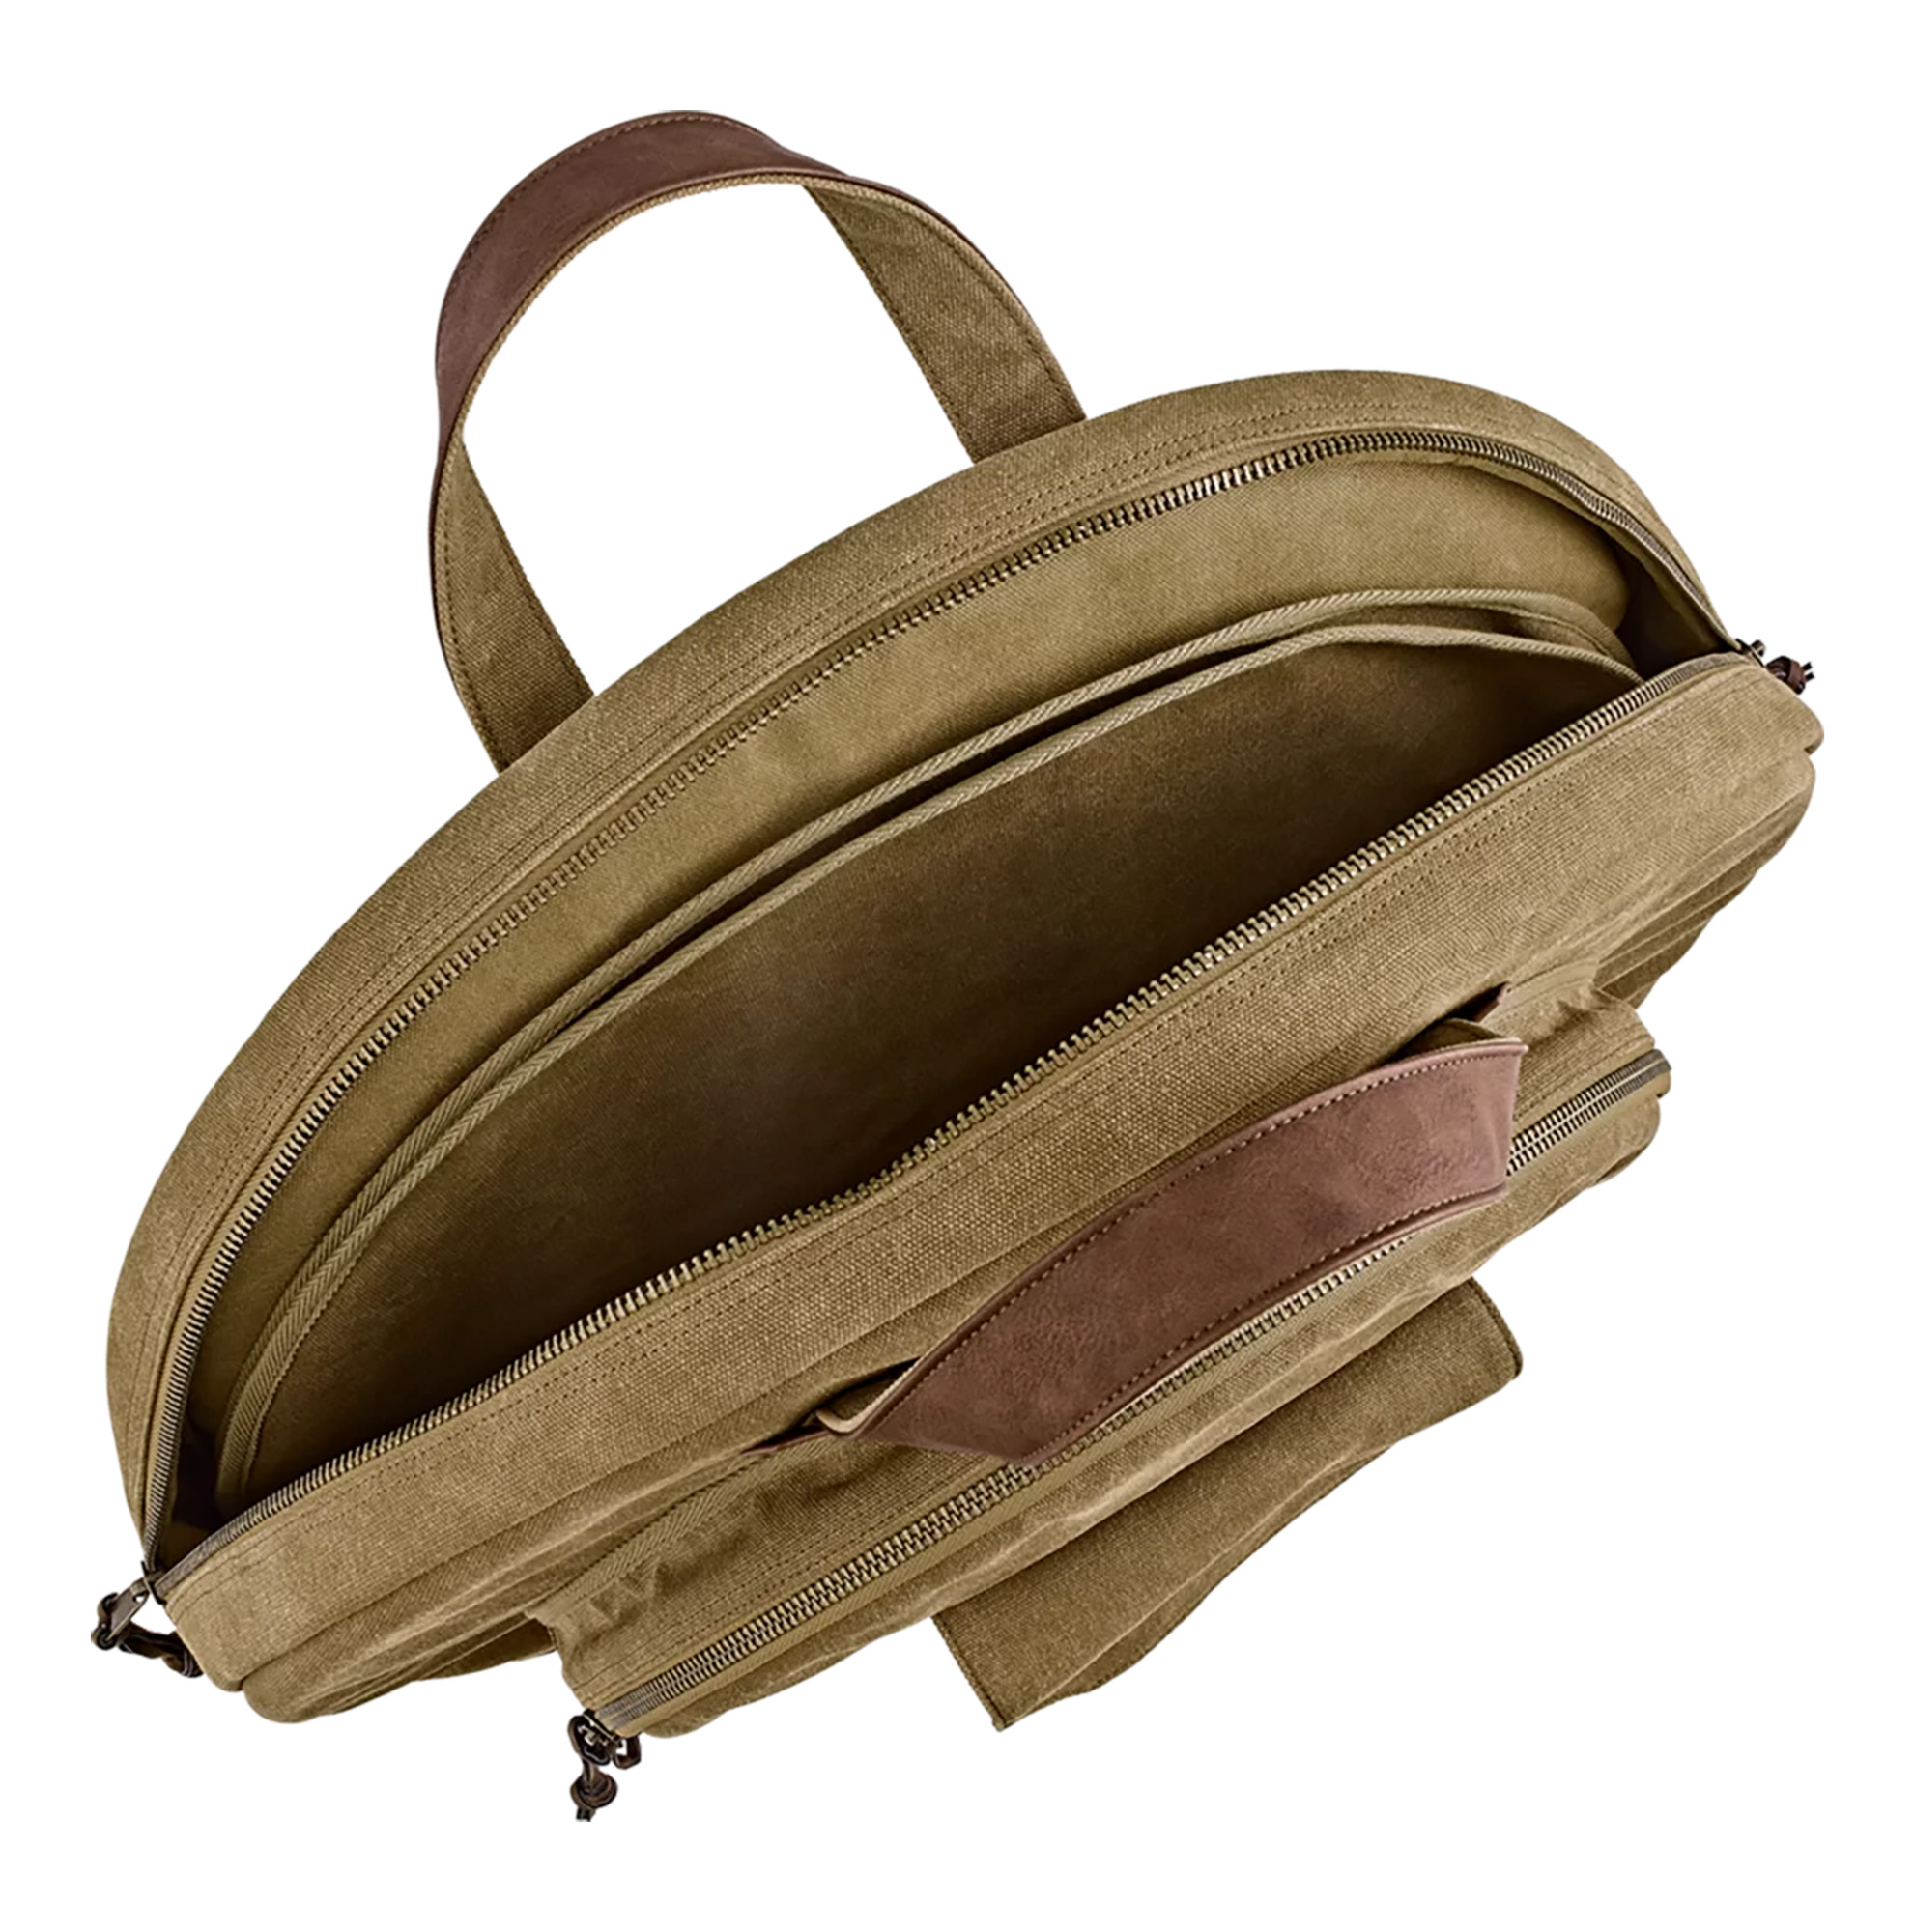 Meinl Housse Cymbales 22 - Cymbal bag - Variation 2